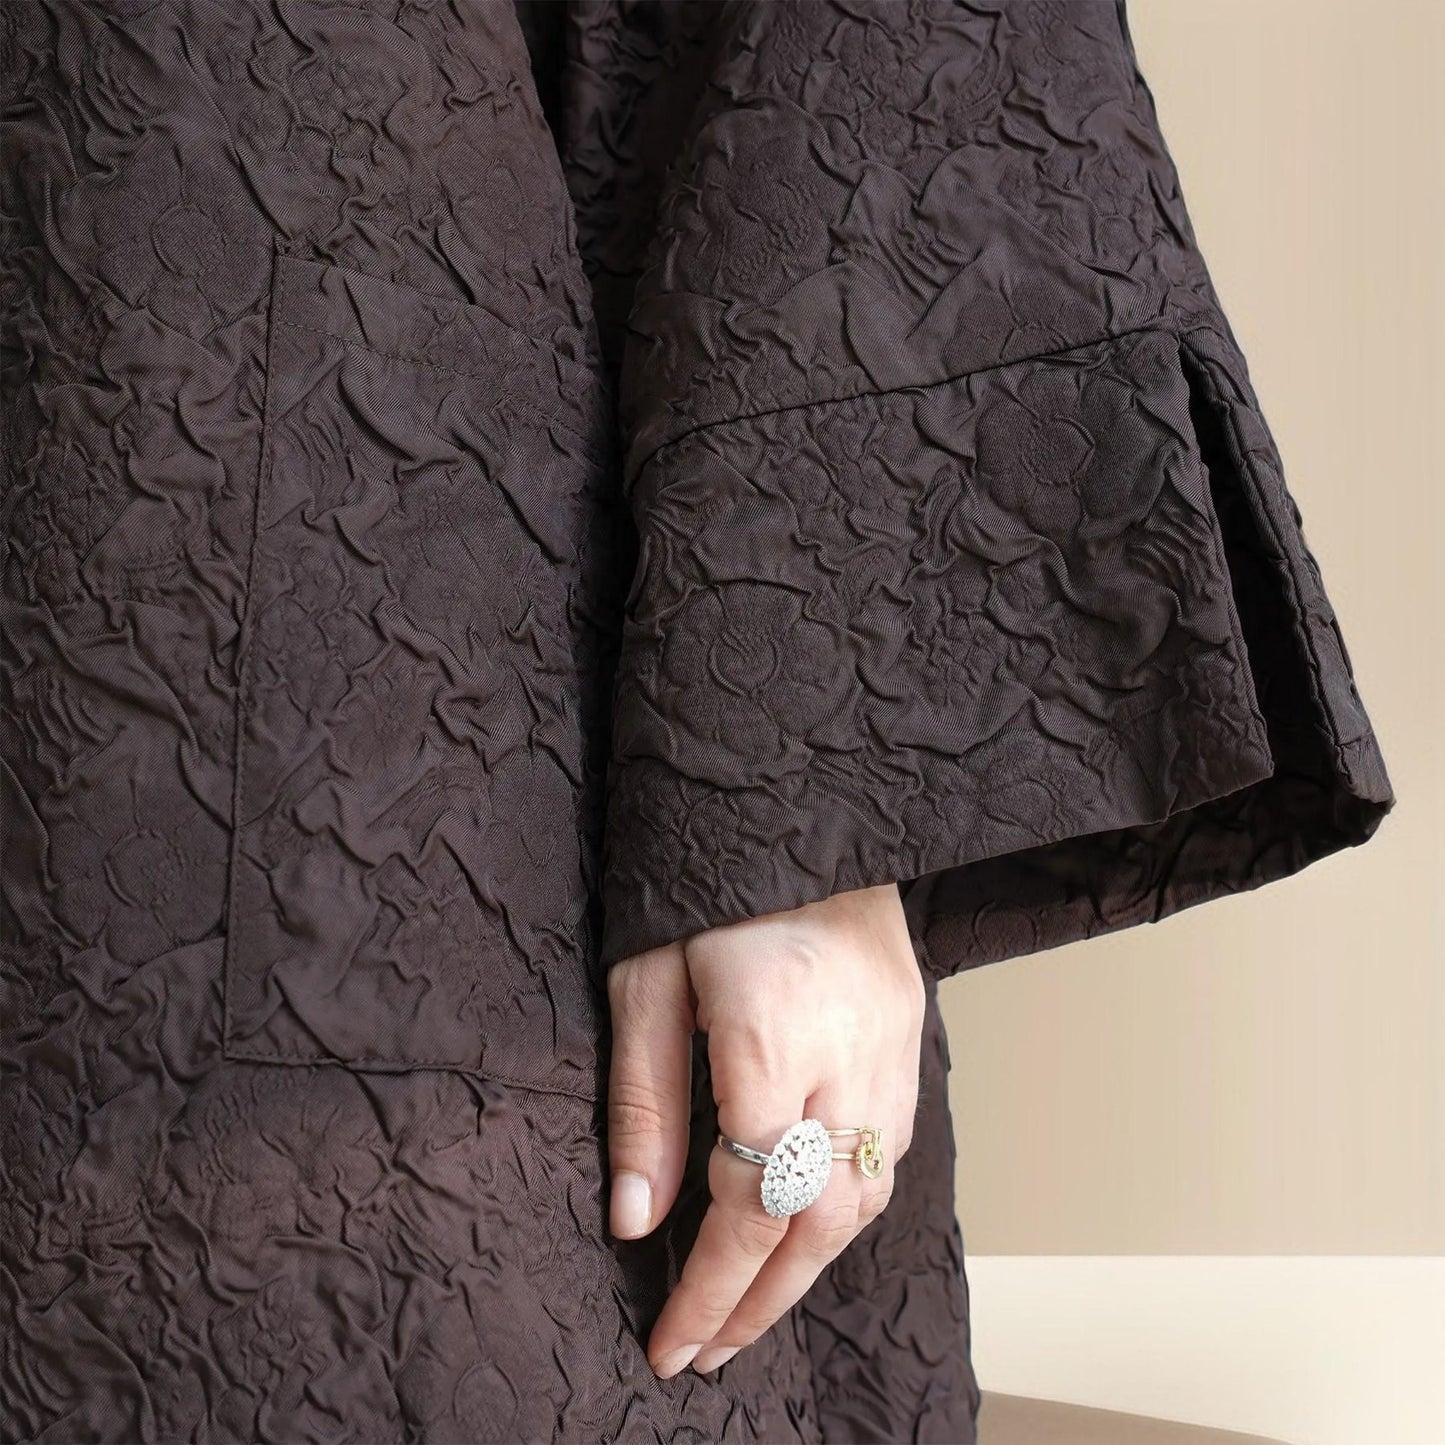 Embossed Winter Abaya Robe with Vest - Try Modest Limited 